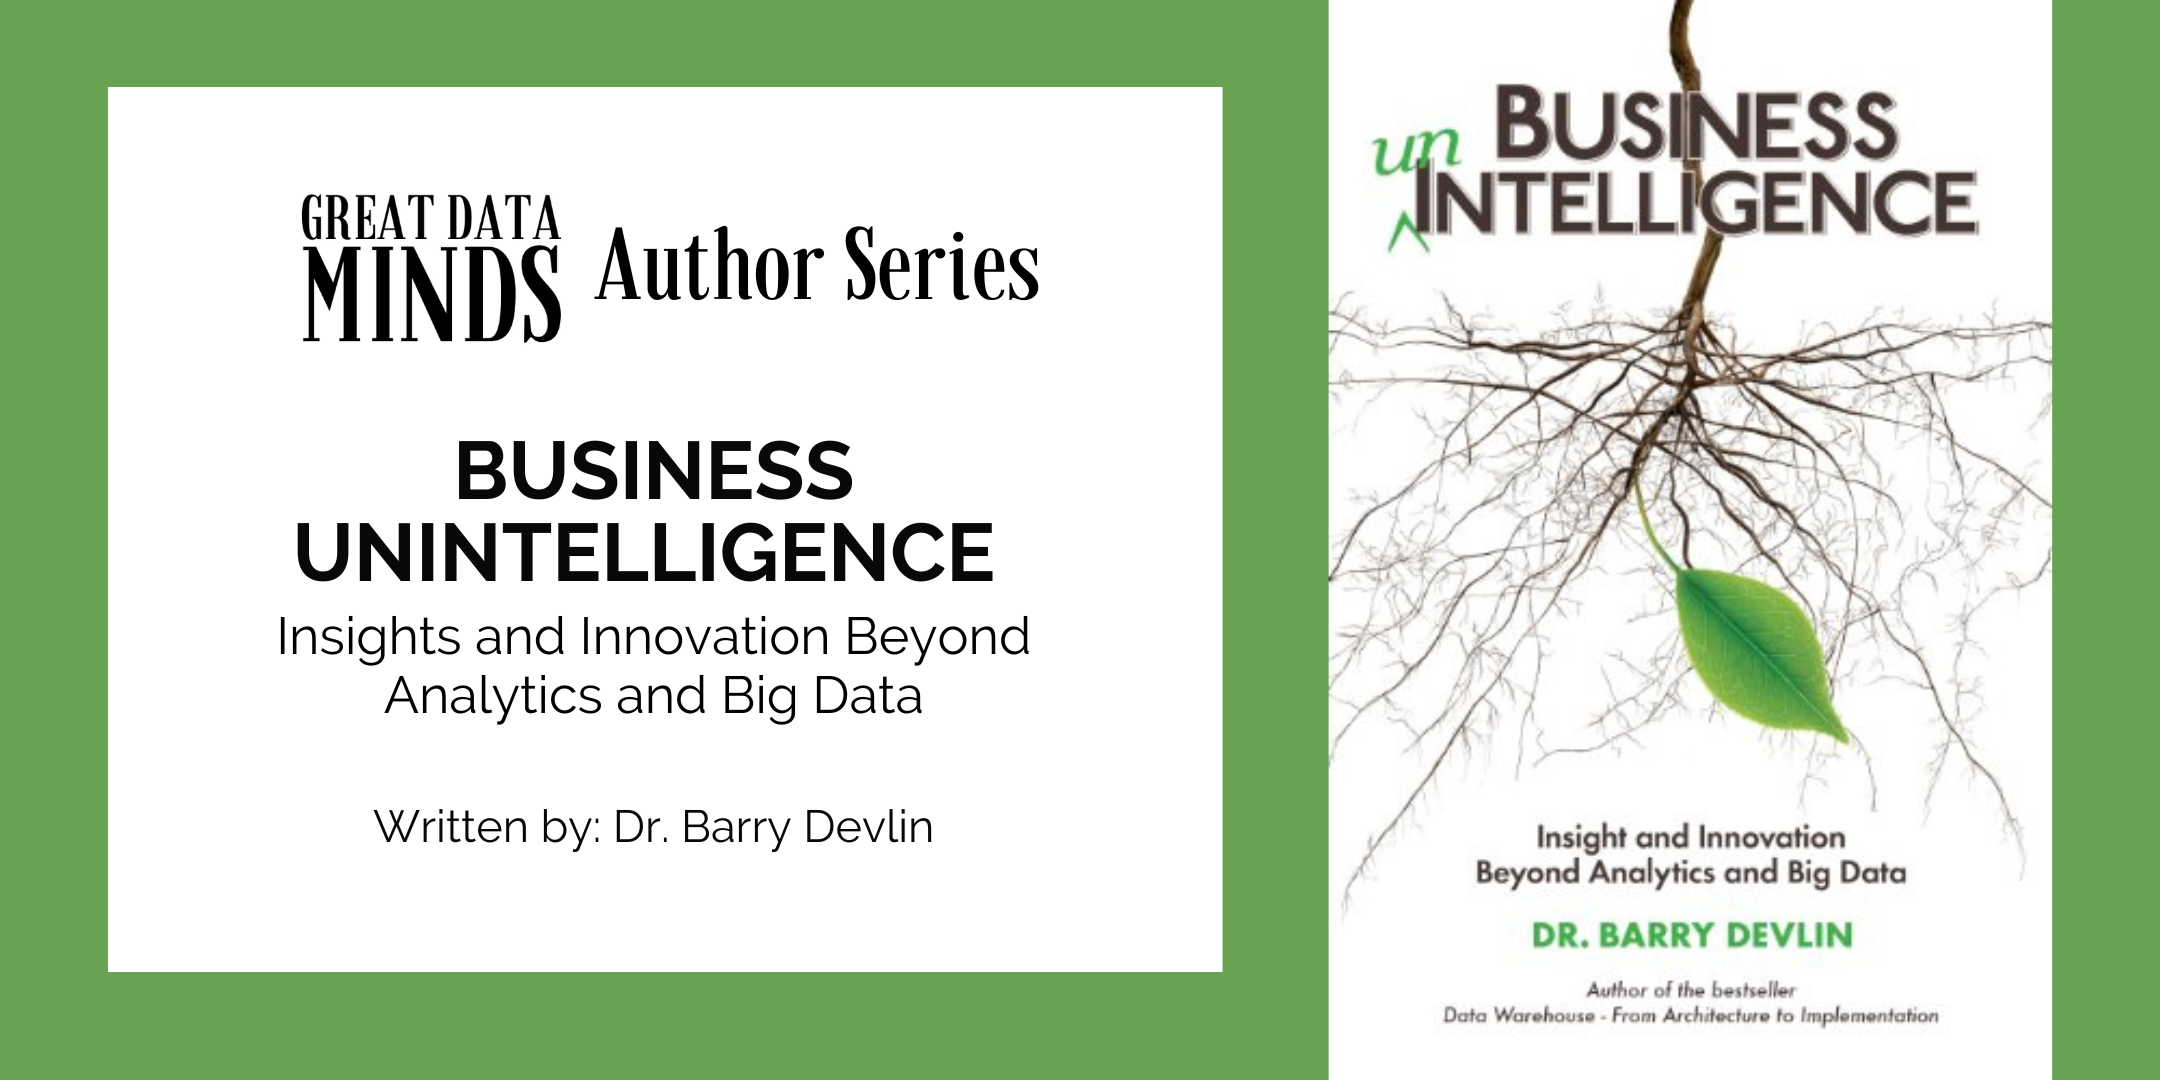 Business unIntelligence by Dr. Barry Devlin